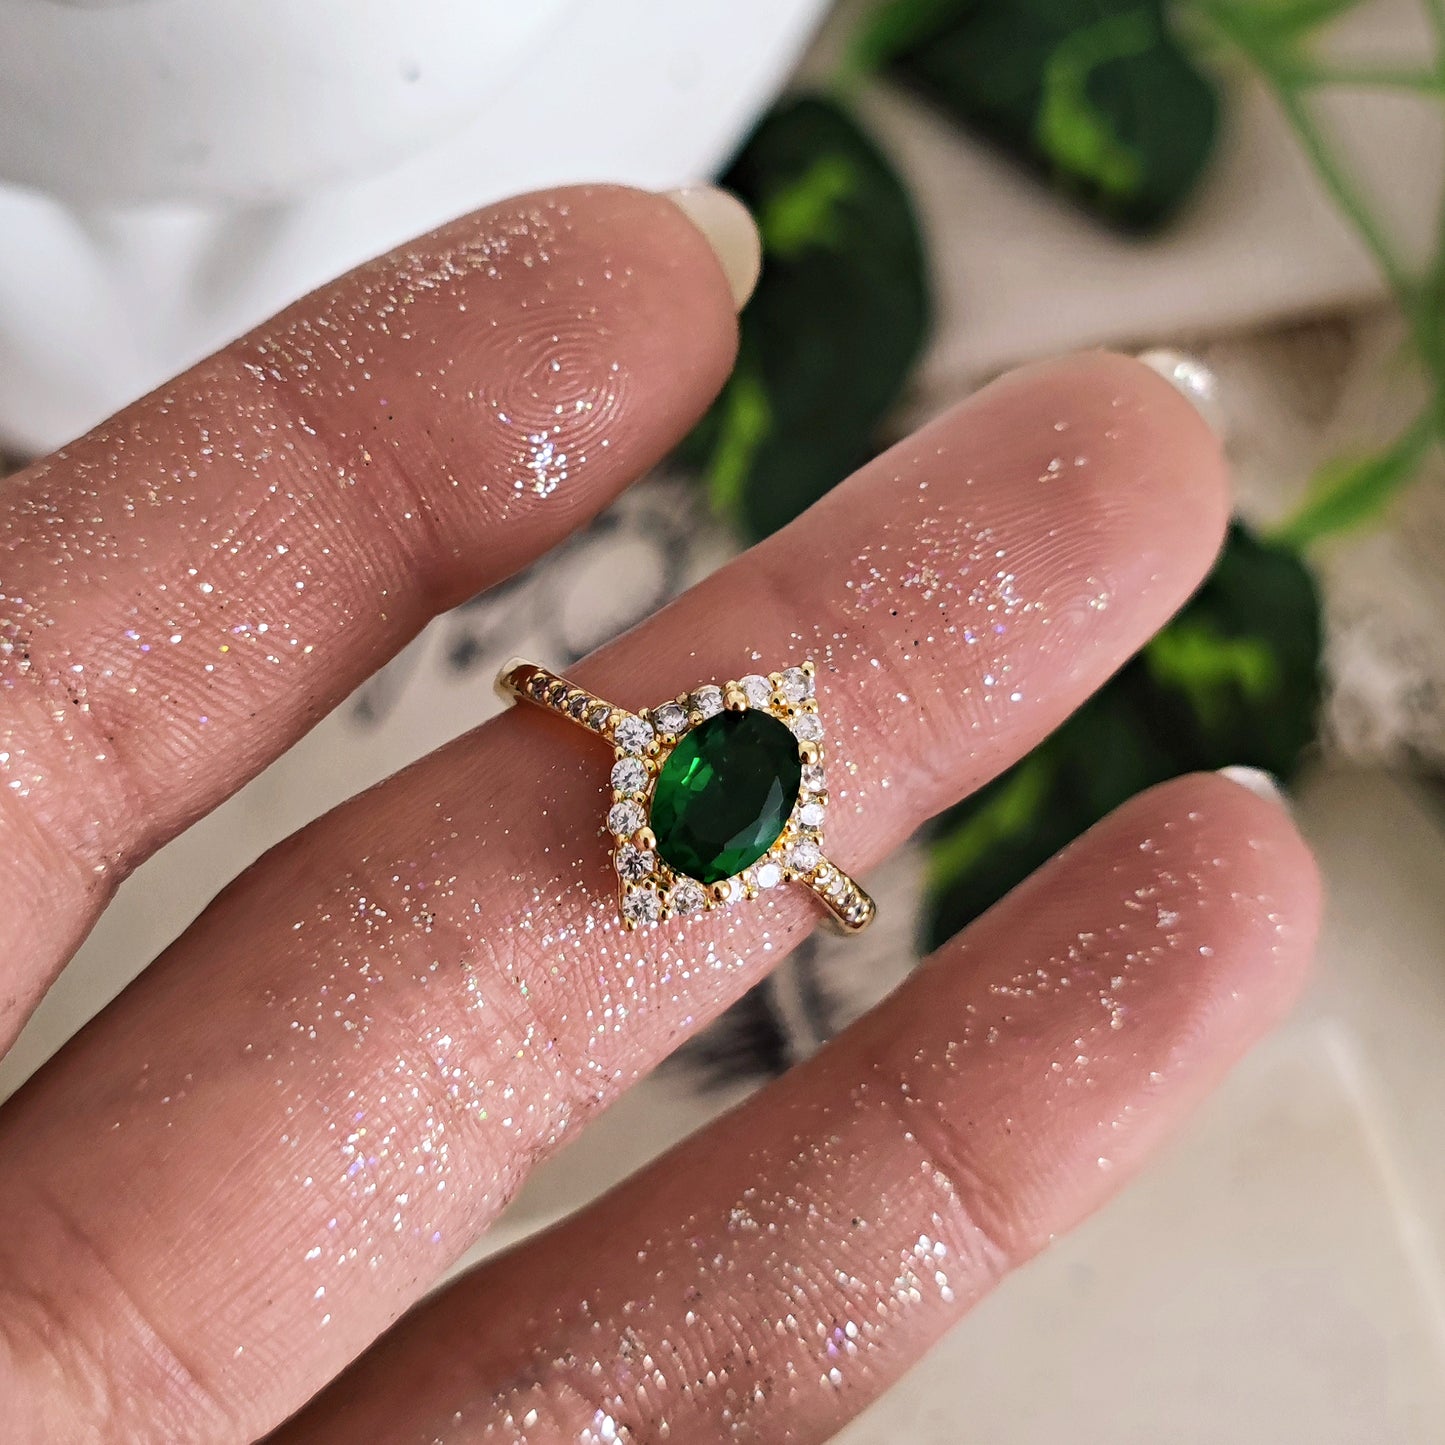 Adjustable Ring "Demeter" in gold plated brass and emerald green cubic zirconia